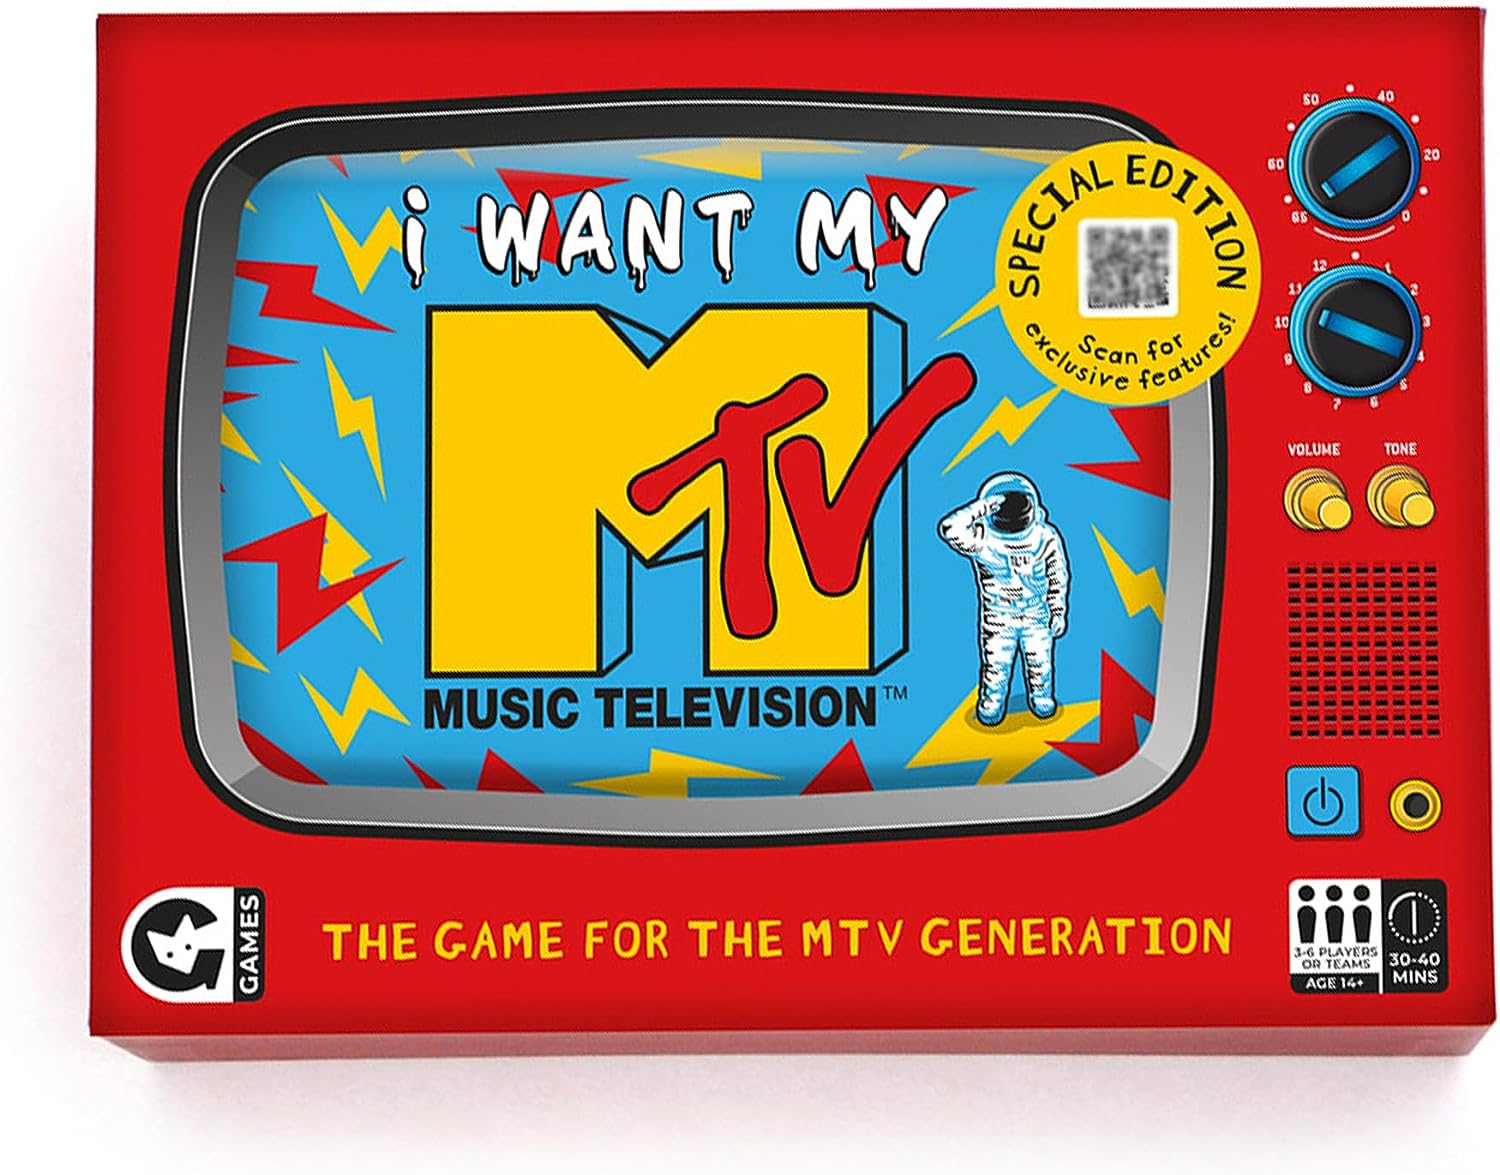 I want my MTV music television card game. Revist the 80's, 90's and 00's in this nostalgic MTV trivia game. 